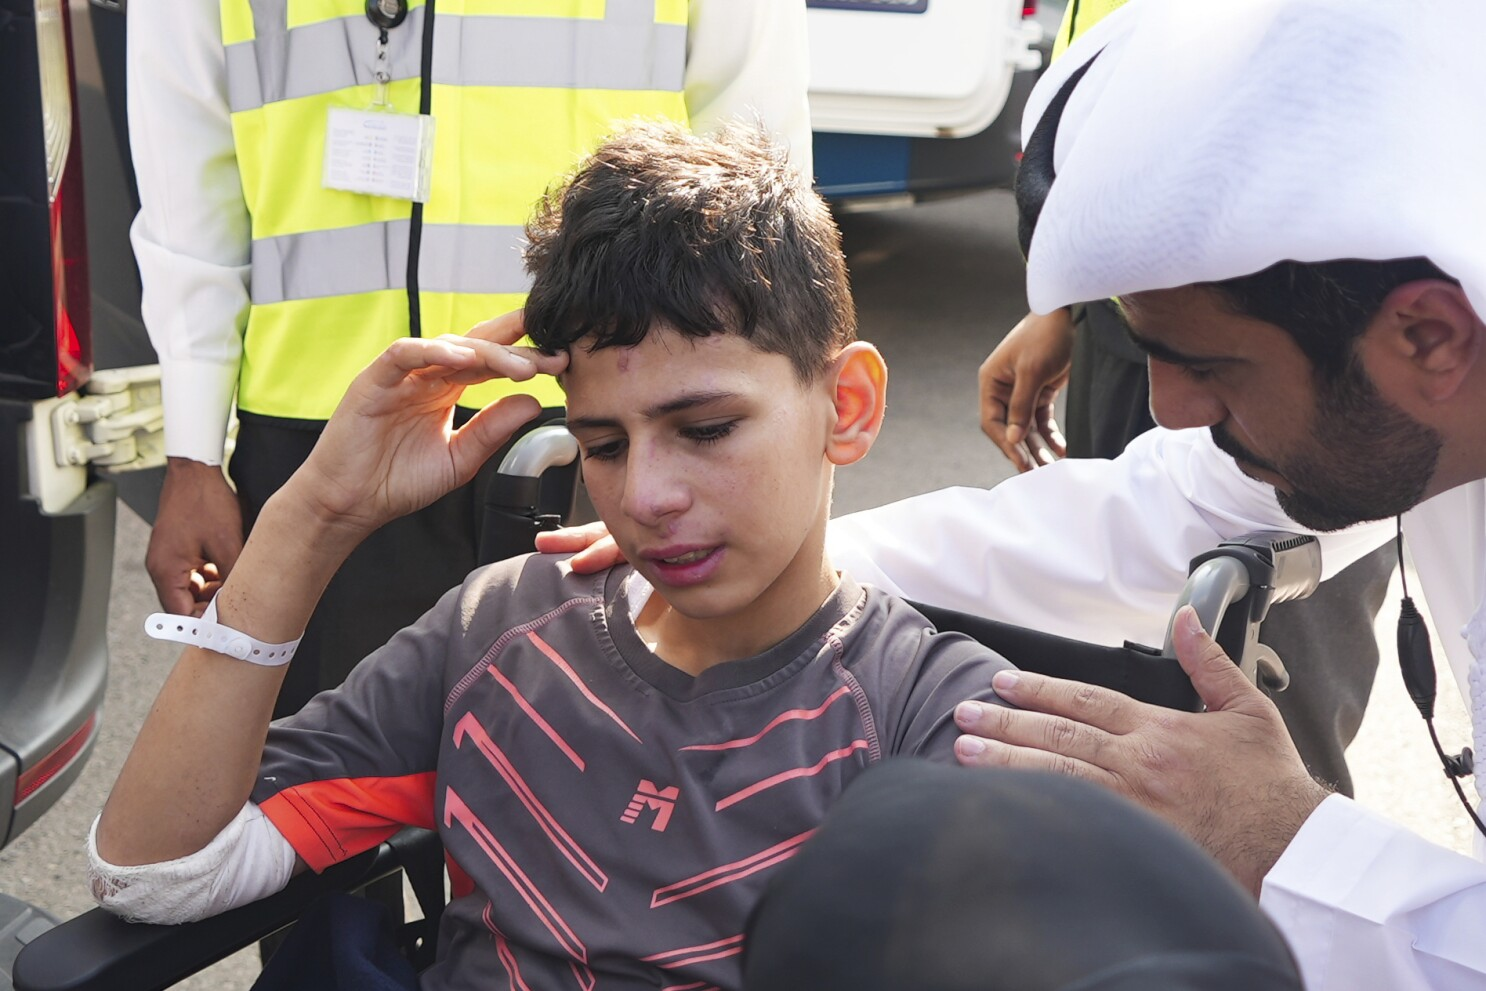 The UAE will treat 1000 children and 1000 cancer patients afflicted by the violence, demonstrating the country's commitment to humanitarian help.